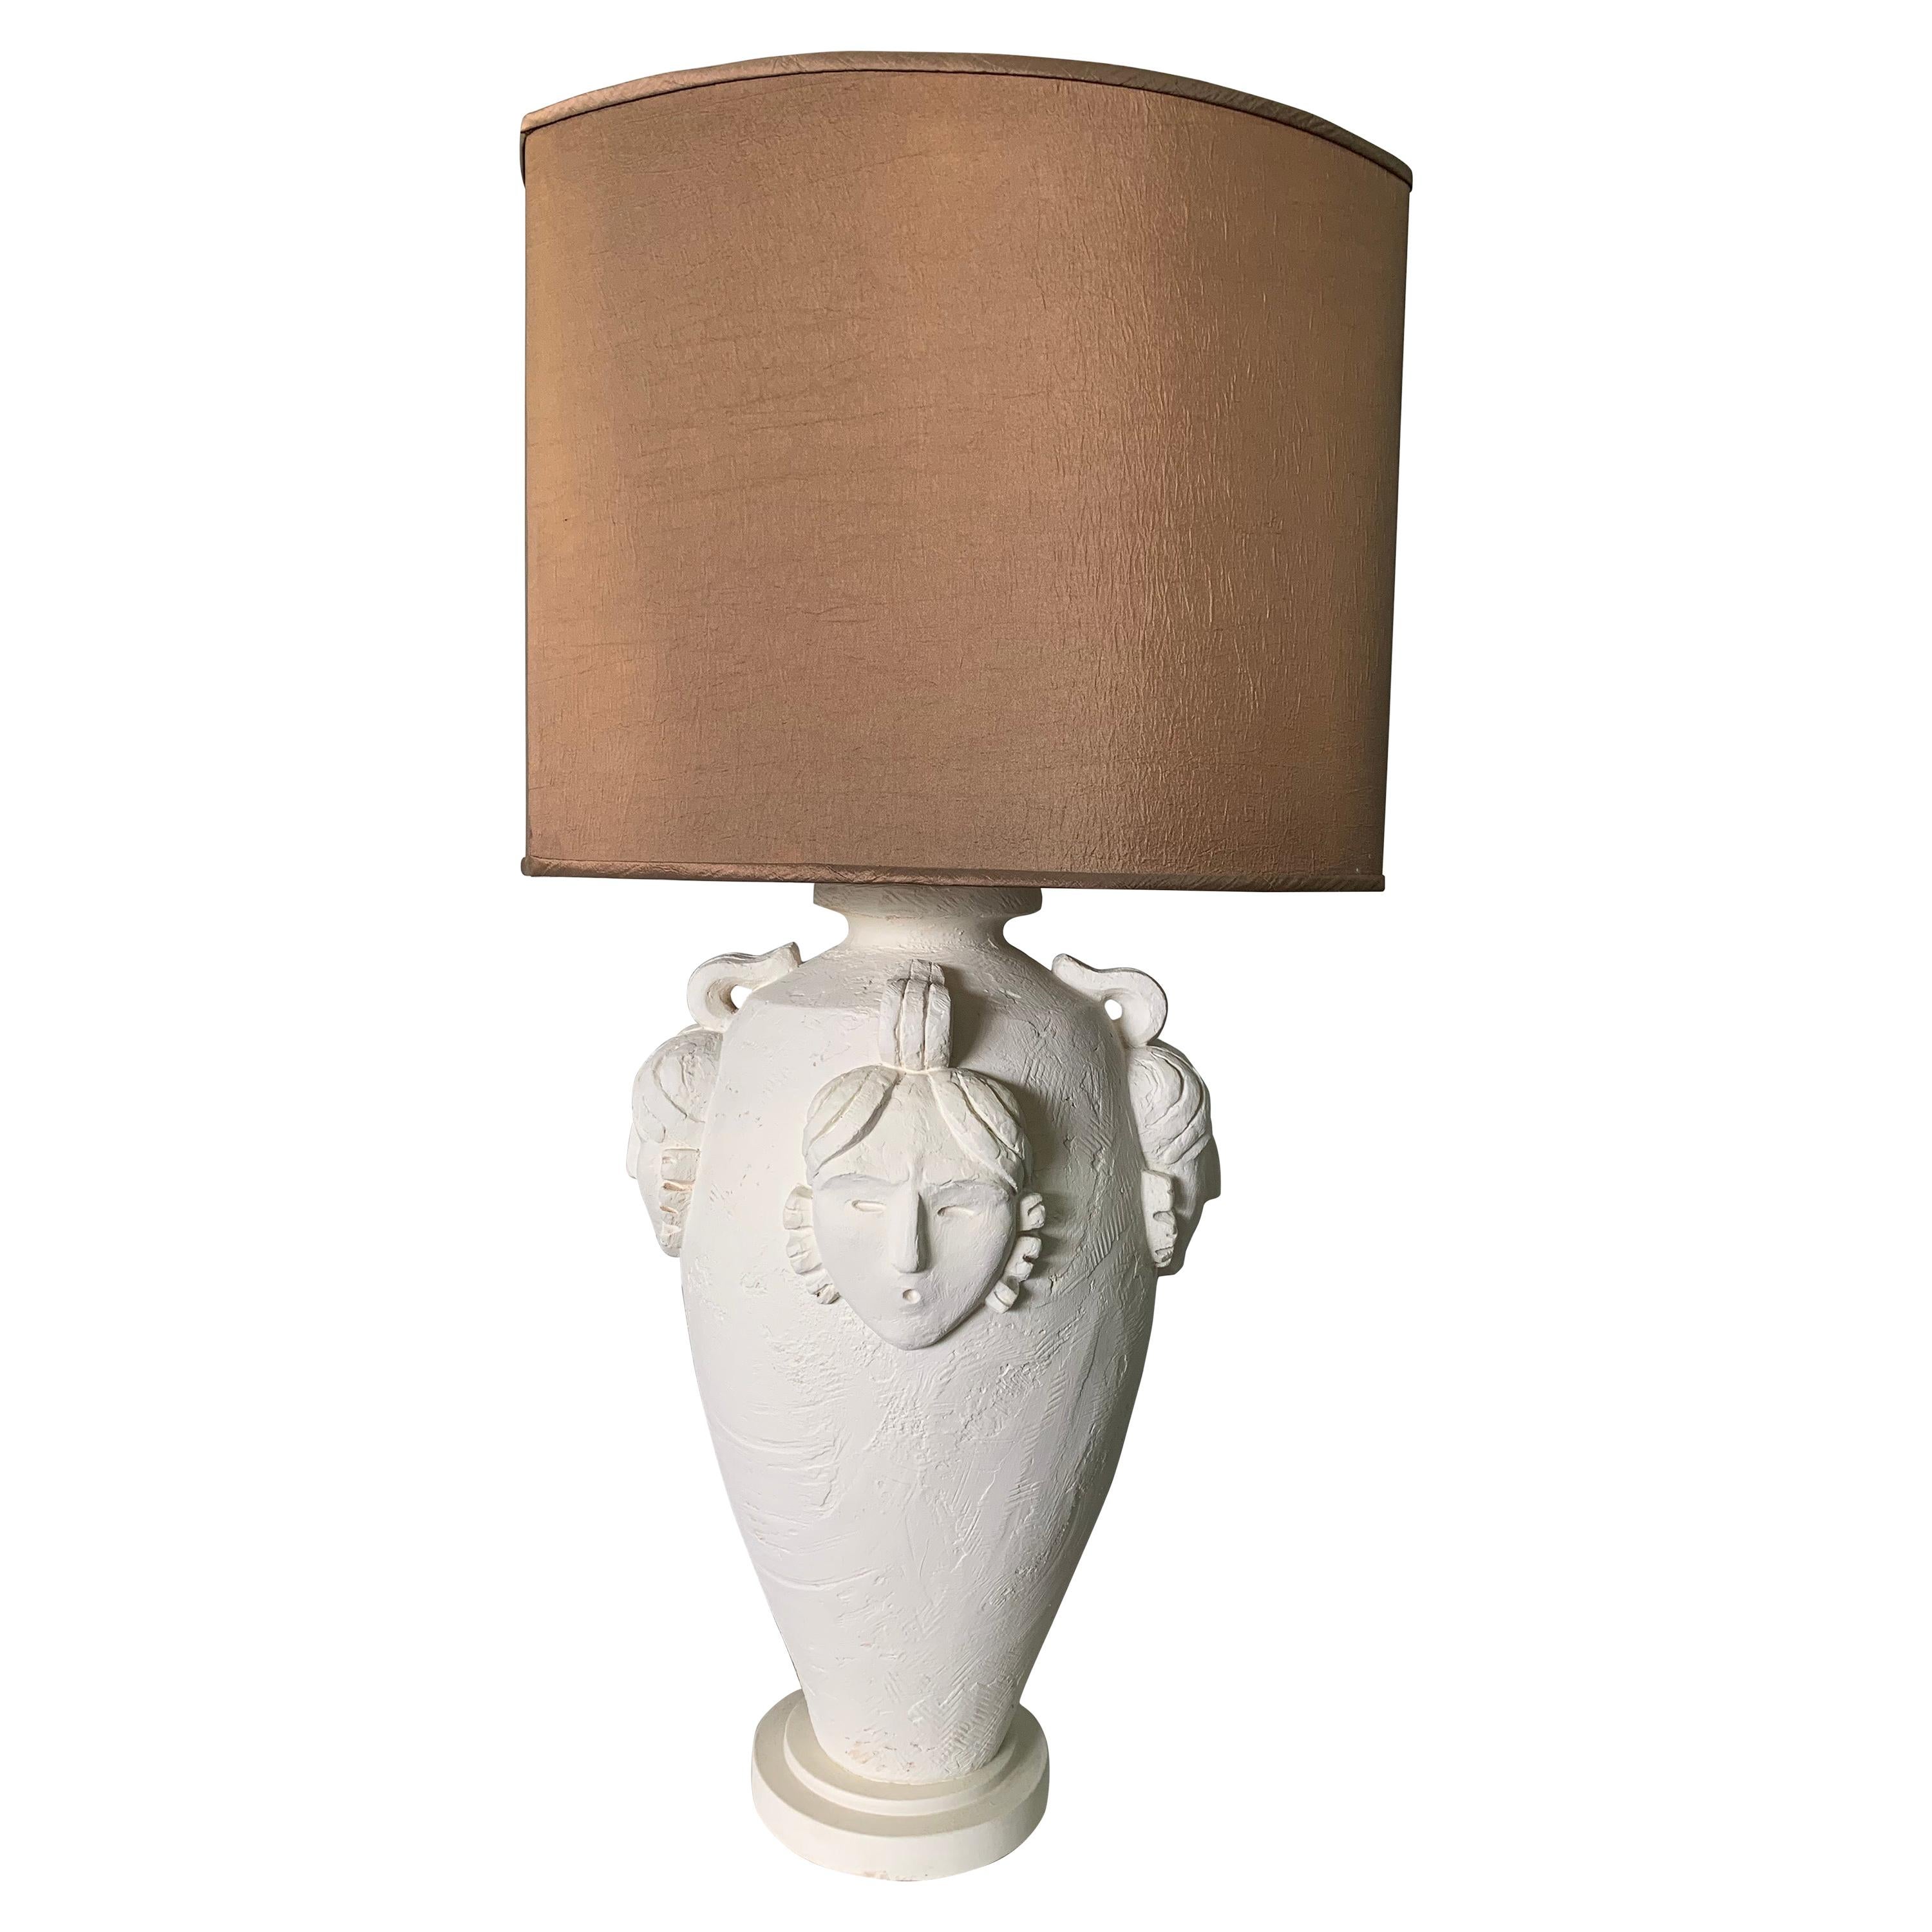 Over-Sized Plaster Figural Table Lamp